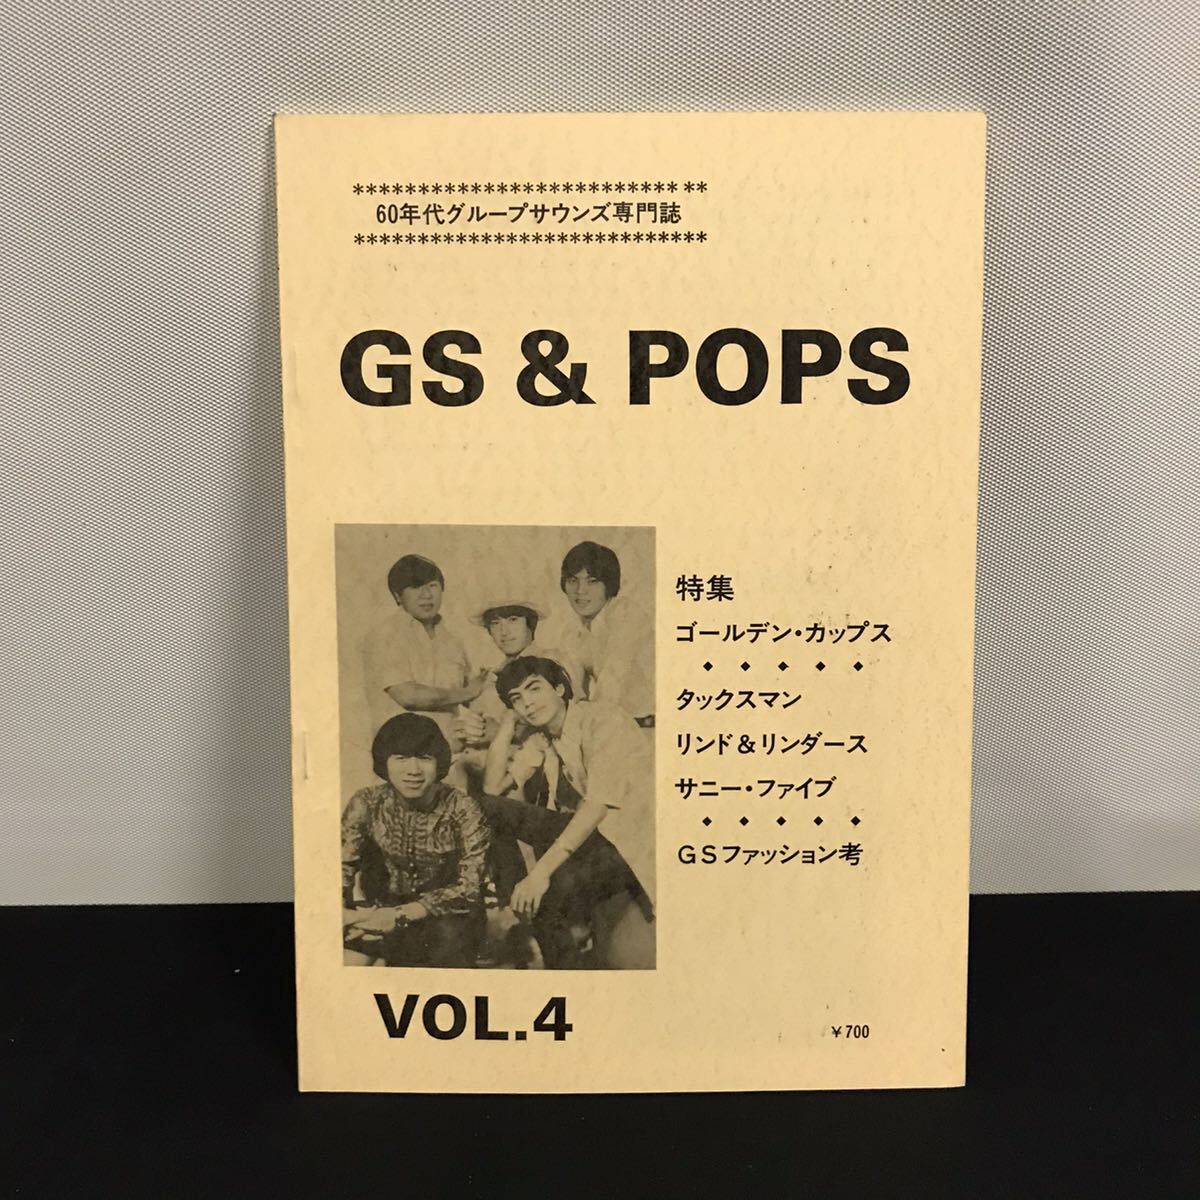 E1772 is # GS&POPS 60 period group saunz speciality magazine Showa era 57 year 10 month 6 day issue 